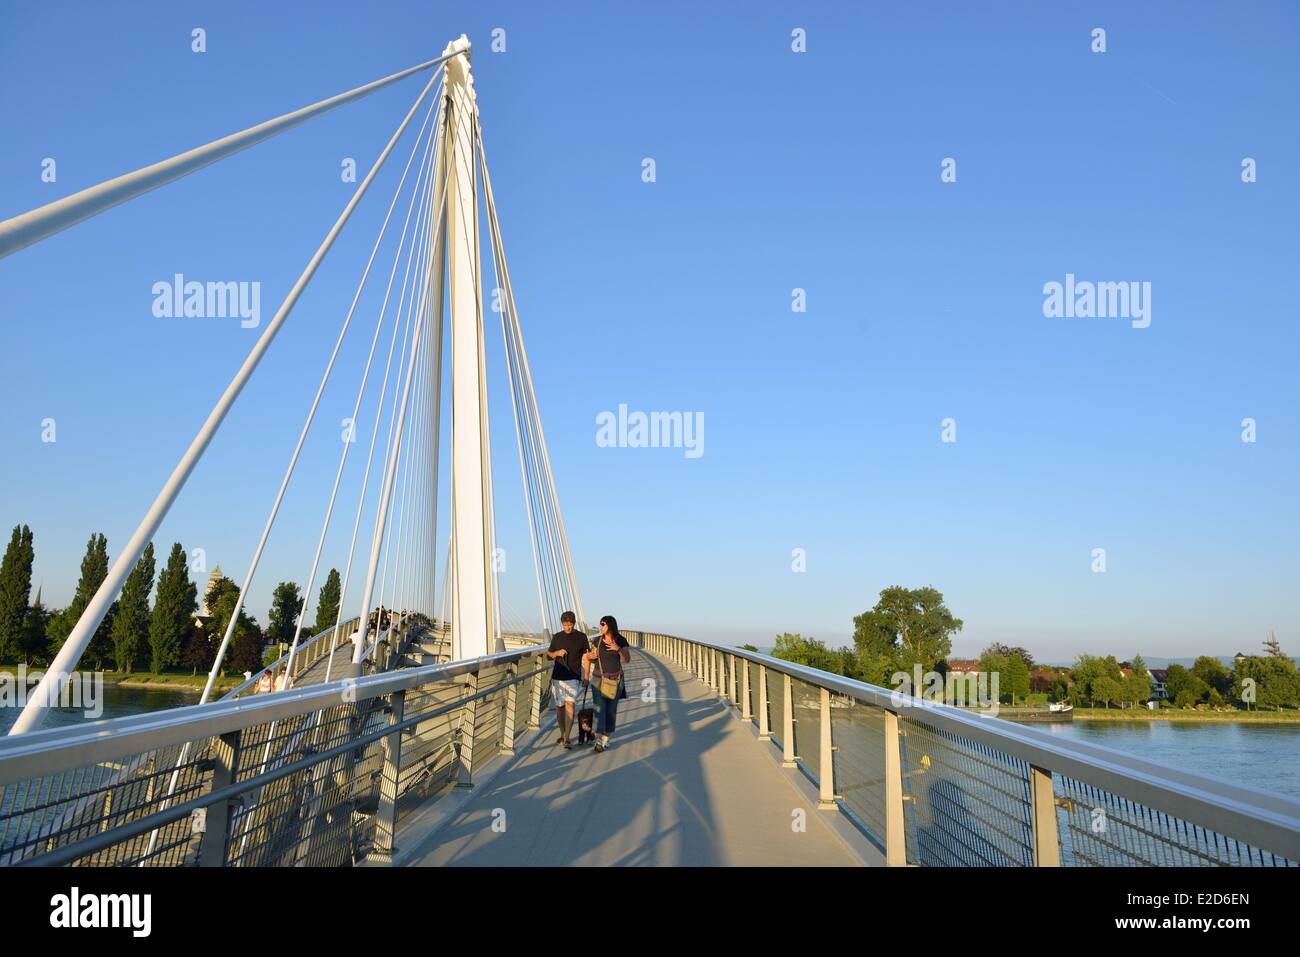 France Bas Rhin between Strasbourg and Kehl in Germany the garden of Two Rivers the Rhine the Mimram bridge connecting the two Stock Photo